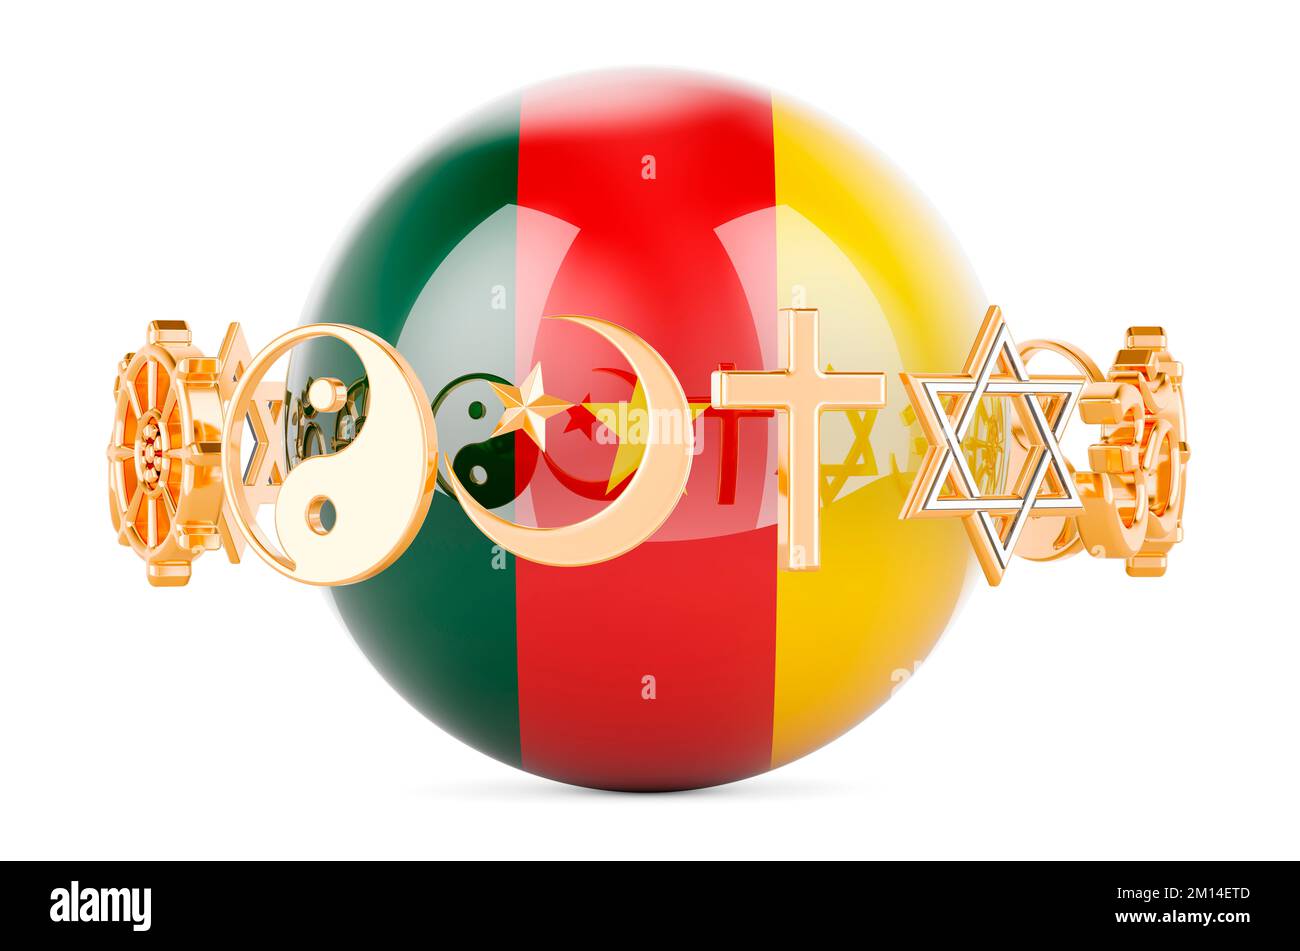 Cameroonian flag painted on sphere with religions symbols around, 3D rendering isolated on white background Stock Photo